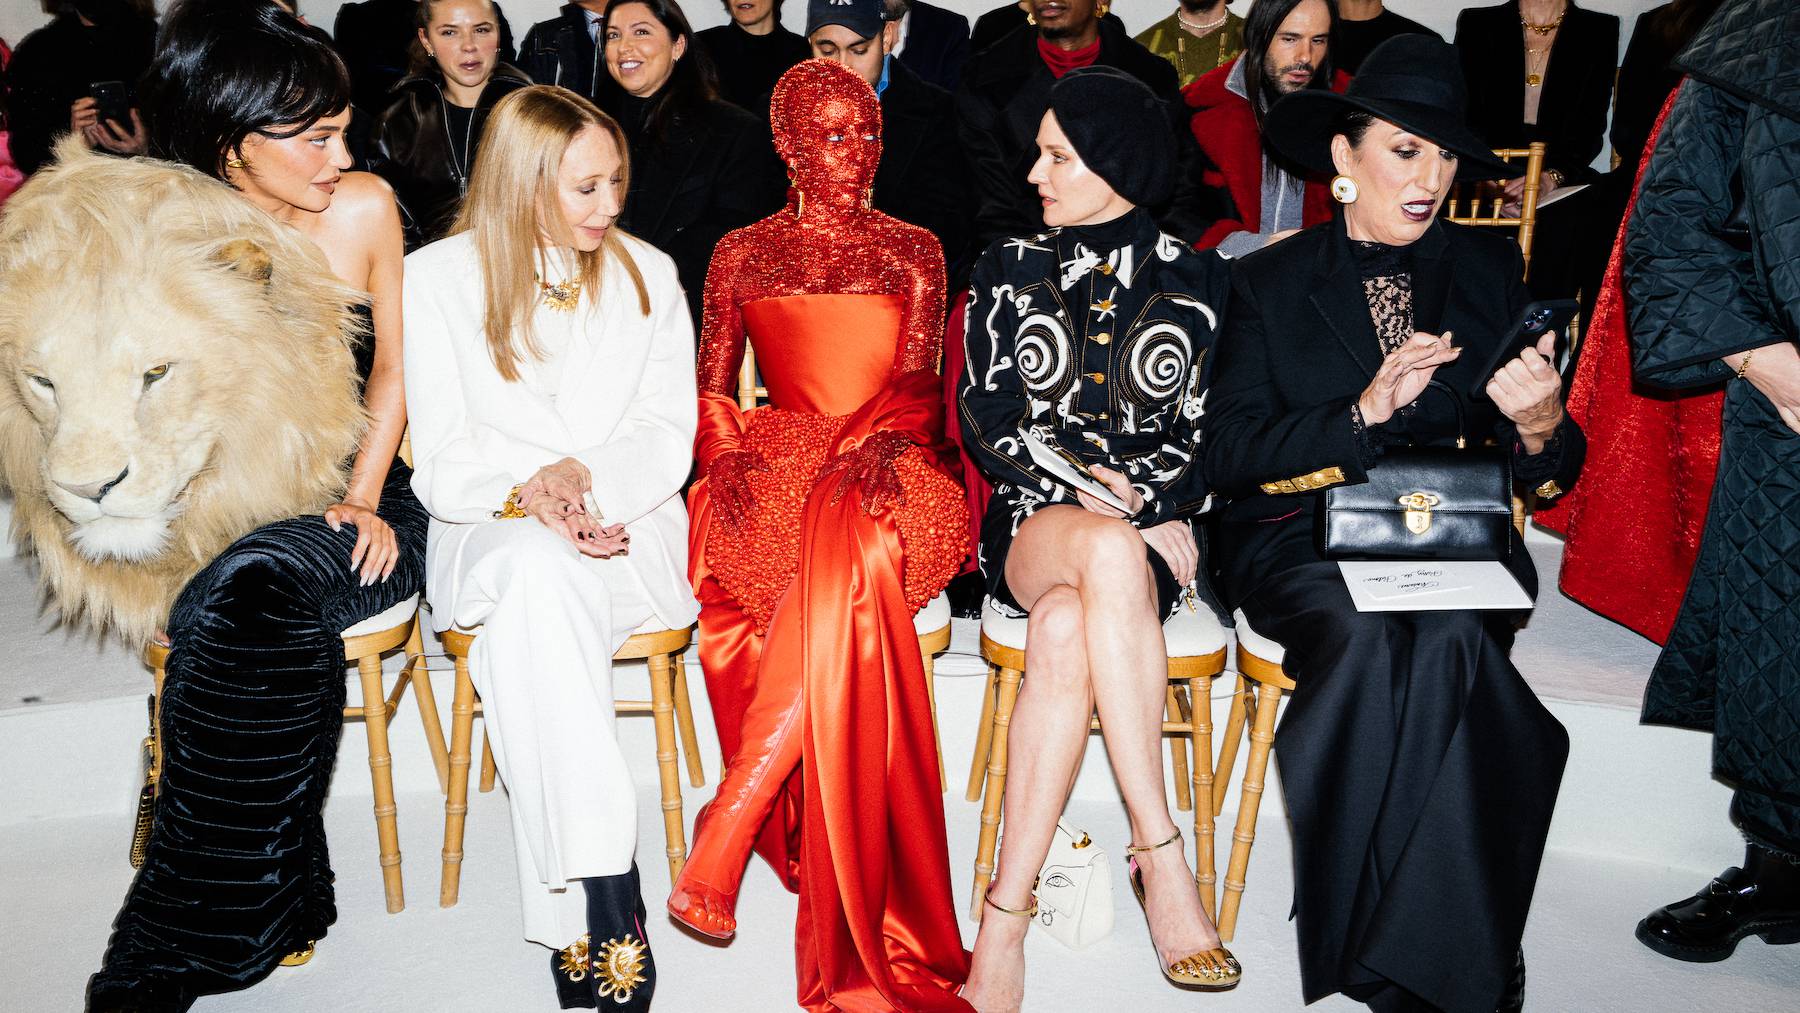 (Left to right) Front row at Schiaparelli's Couture show in Paris: Kylie Jenner, Marisa Berenson, Doja Cat, Diane Kruger and Rossy de Palma.